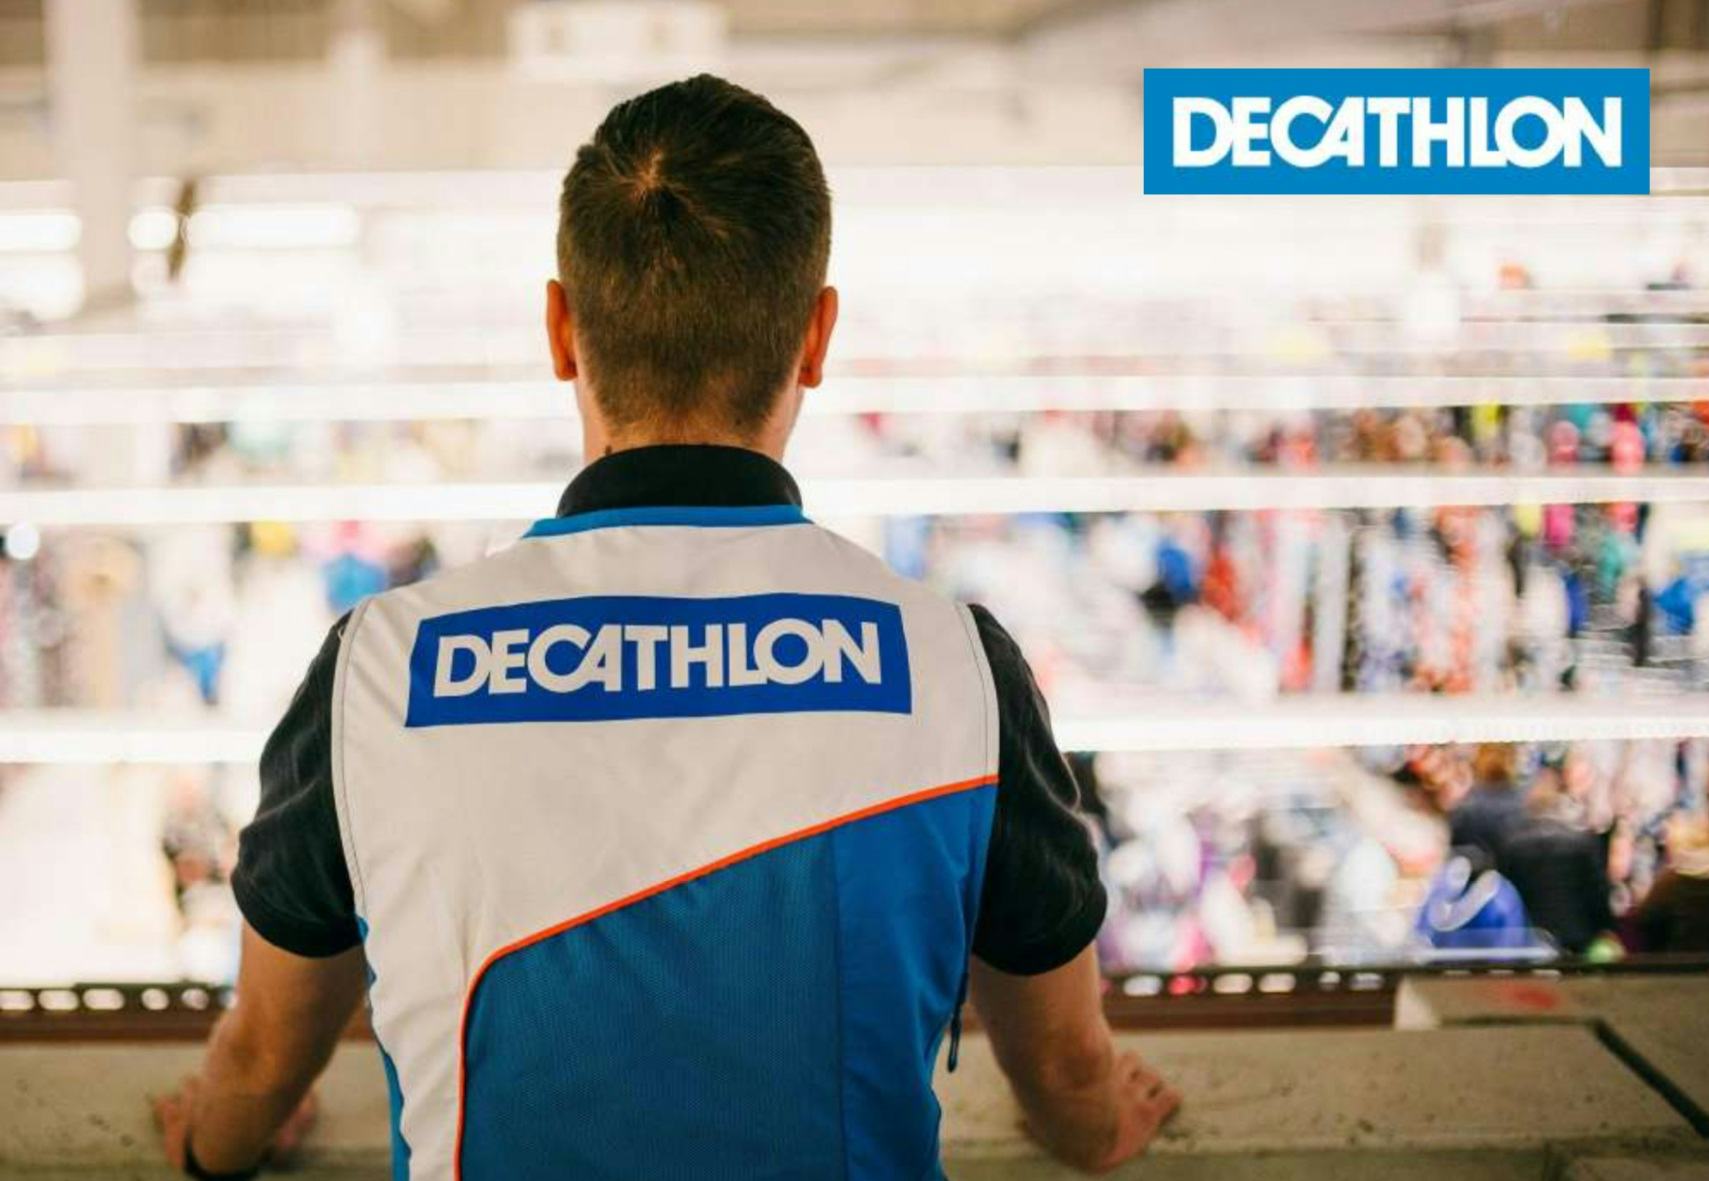 Execution of Decathlon’s omnichannel strategy is now becoming apparent by the rapid expansion of the number of stores. – Photo Decathlon